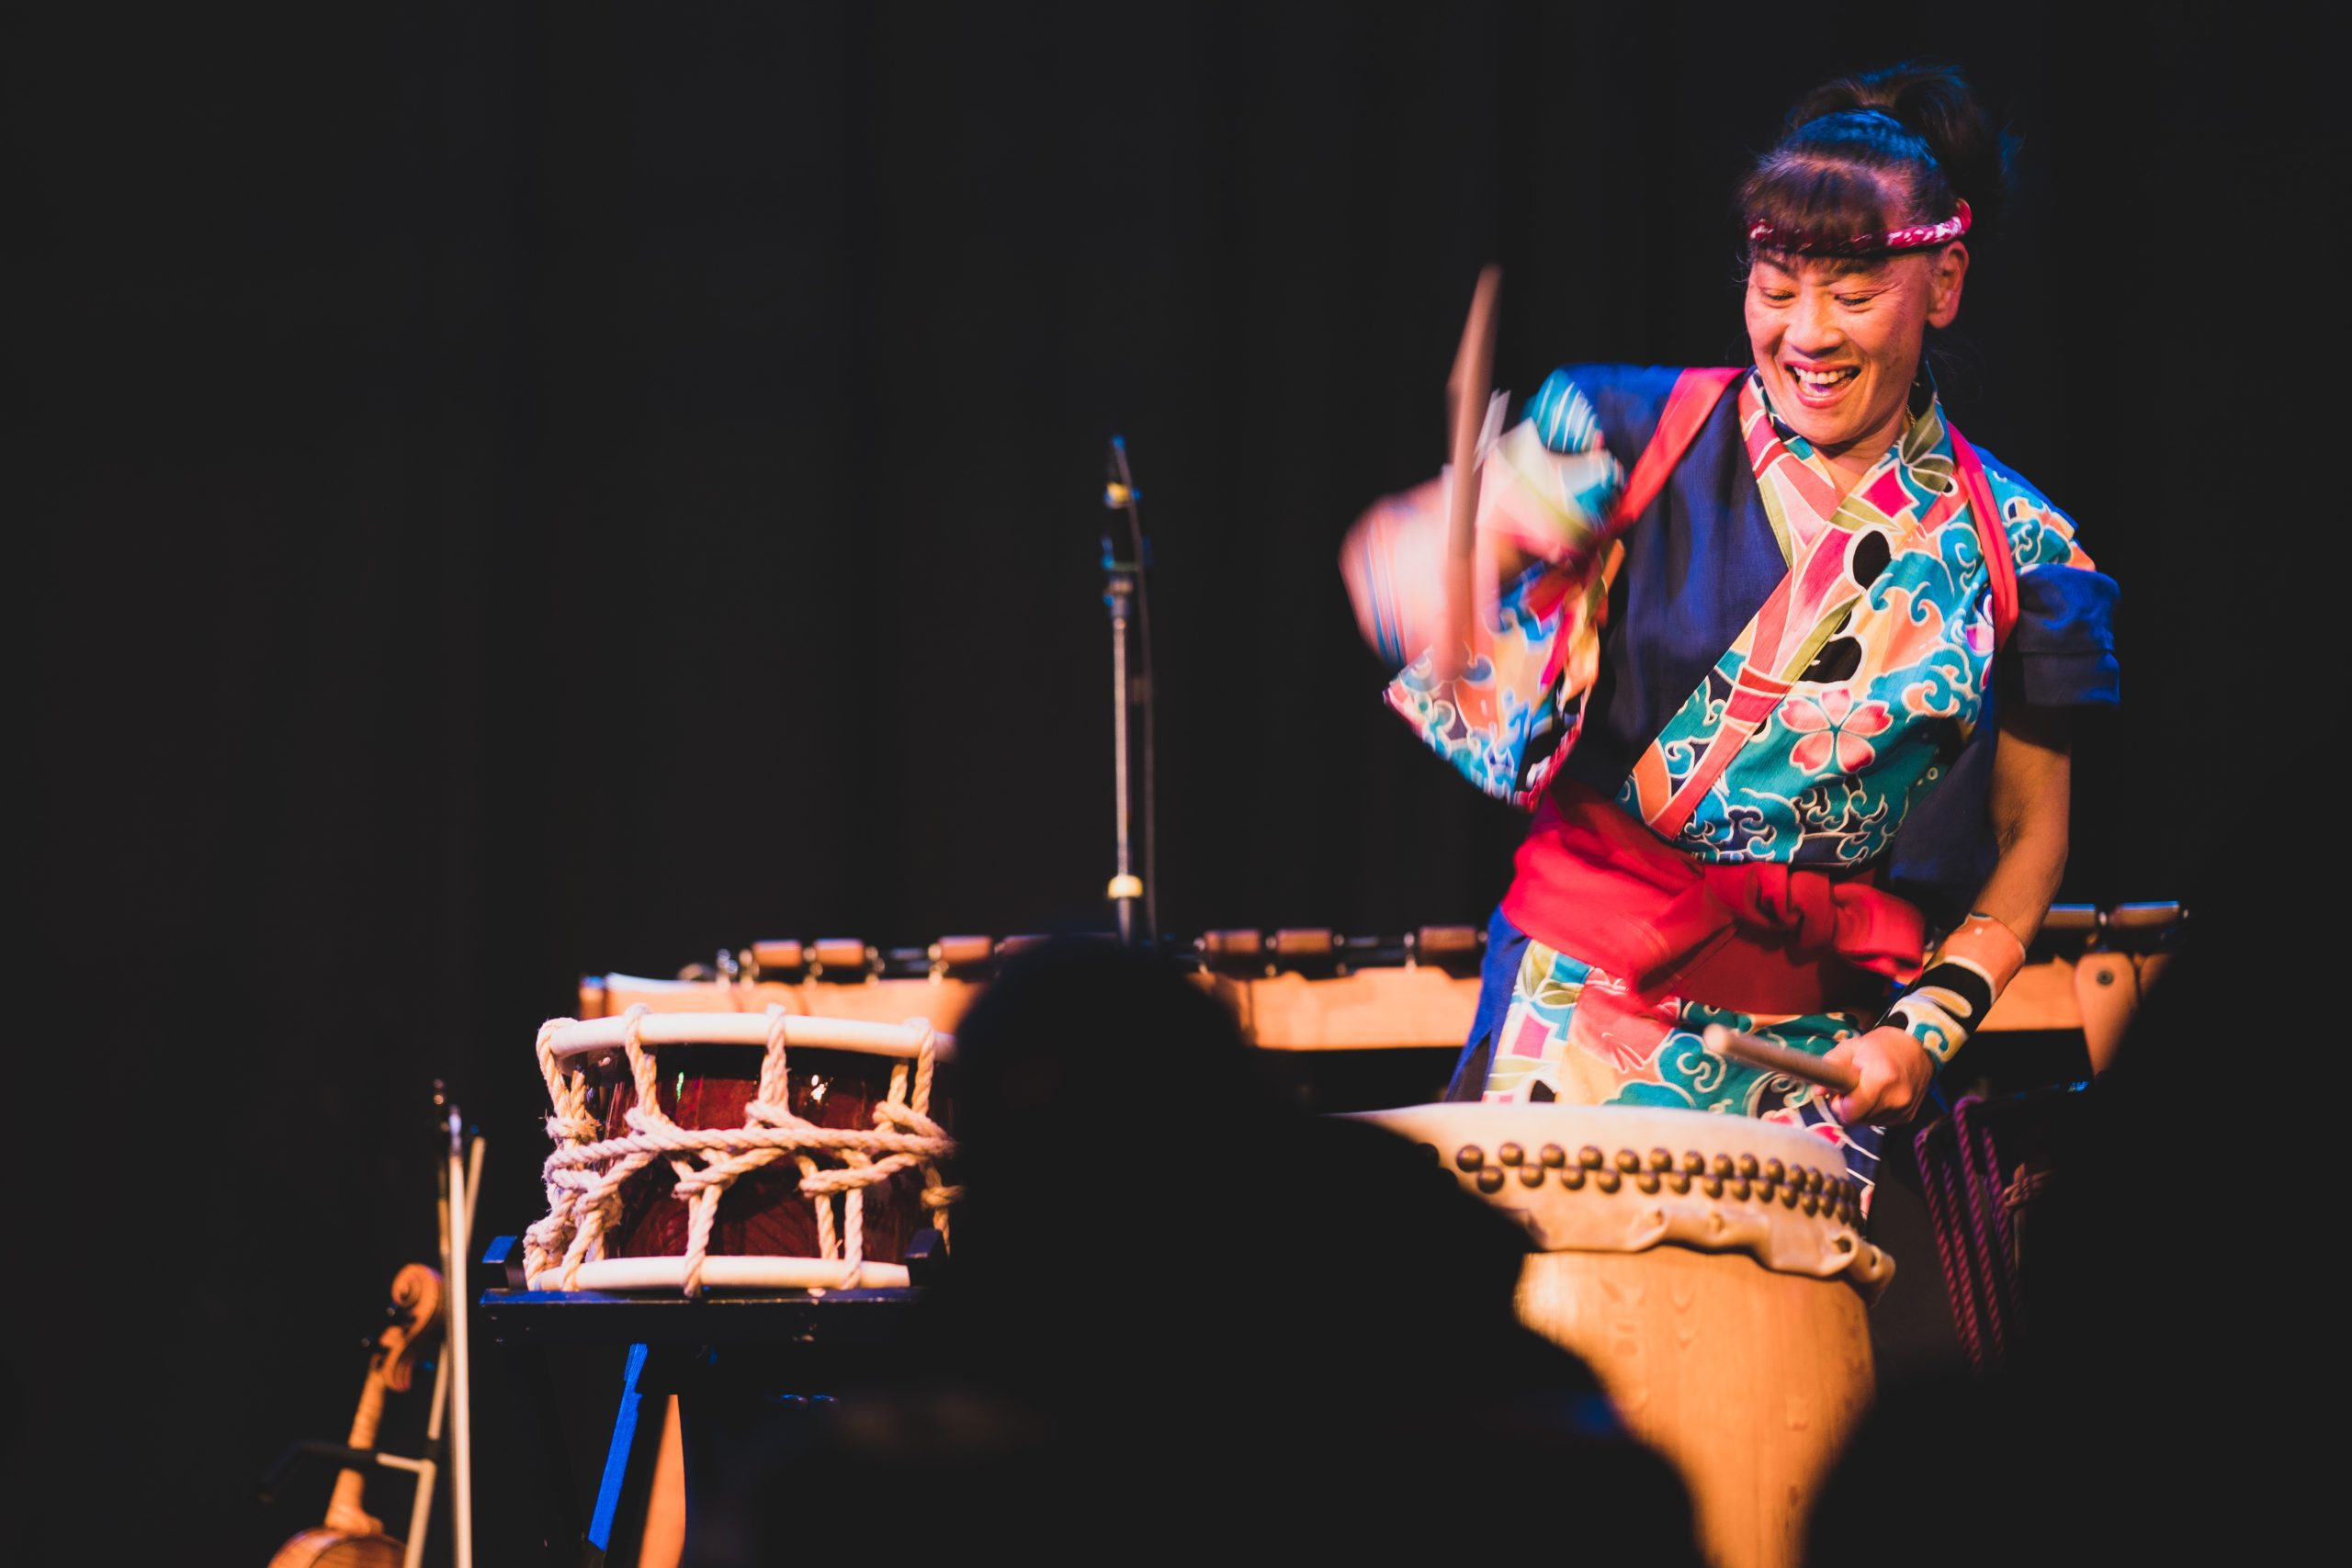 woman in colorful outfit playing a big drum with bachi (hardwood drum sticks)